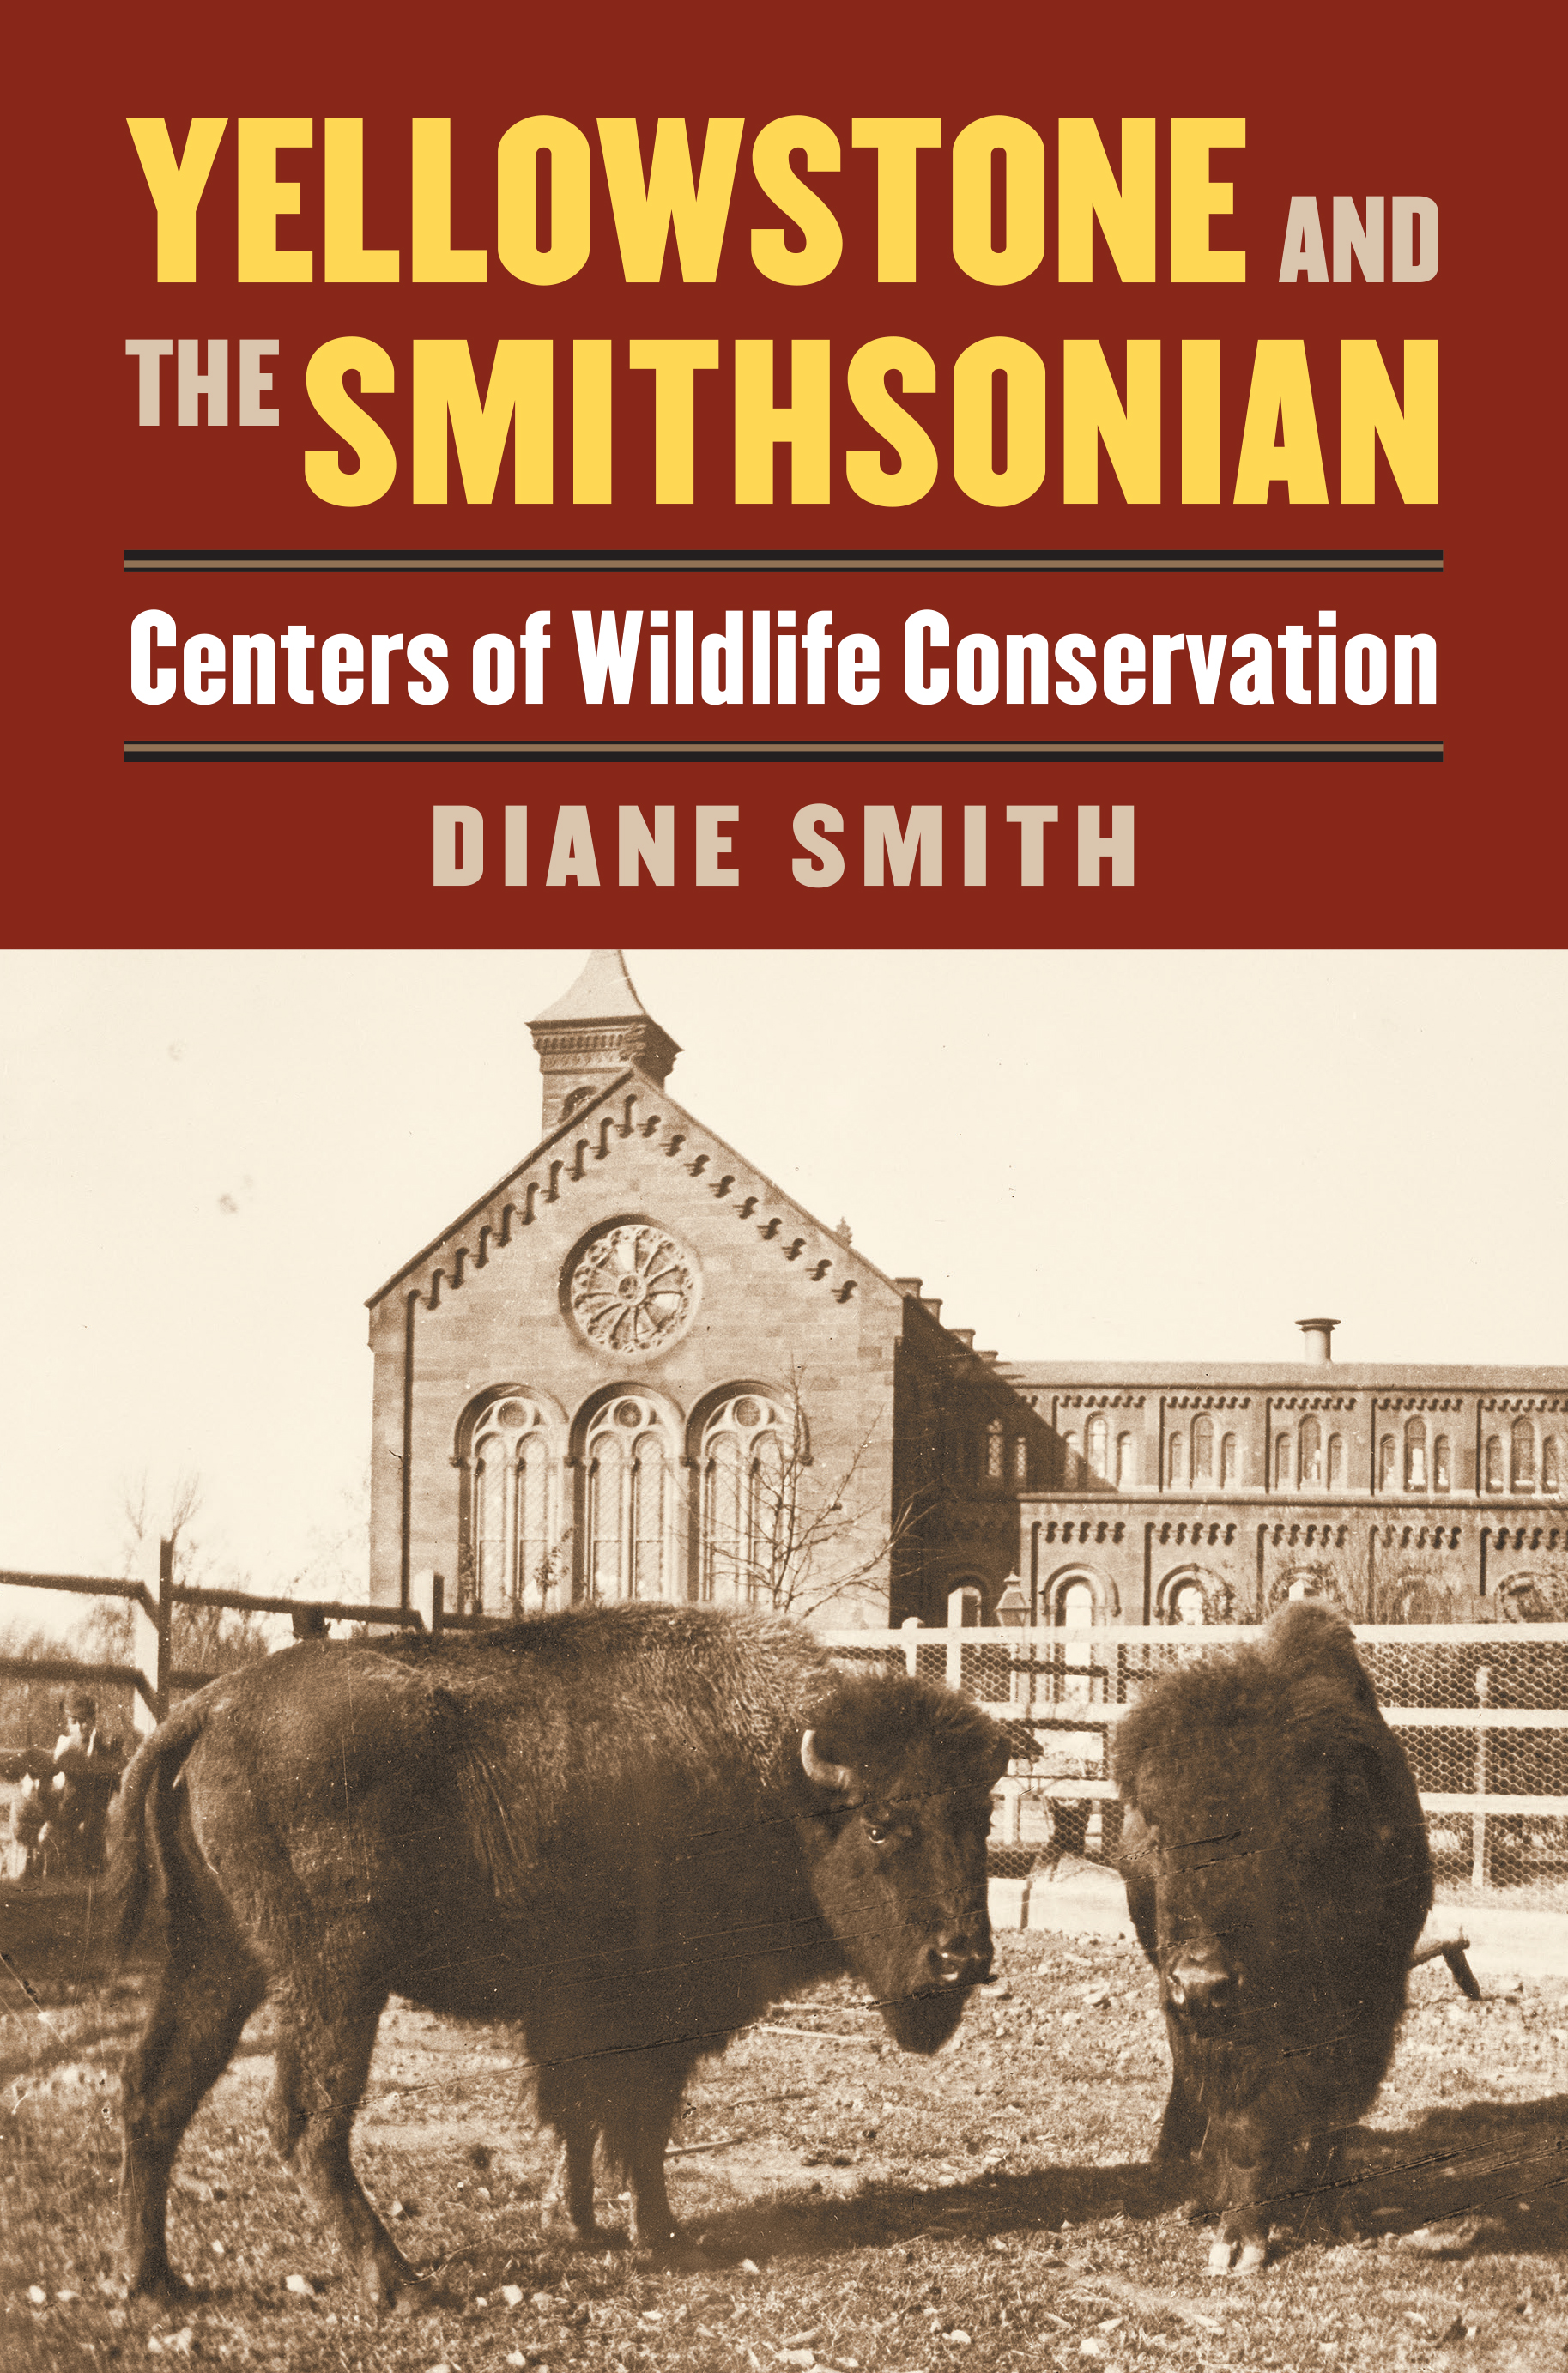 Yellowstone and the Smithsonian